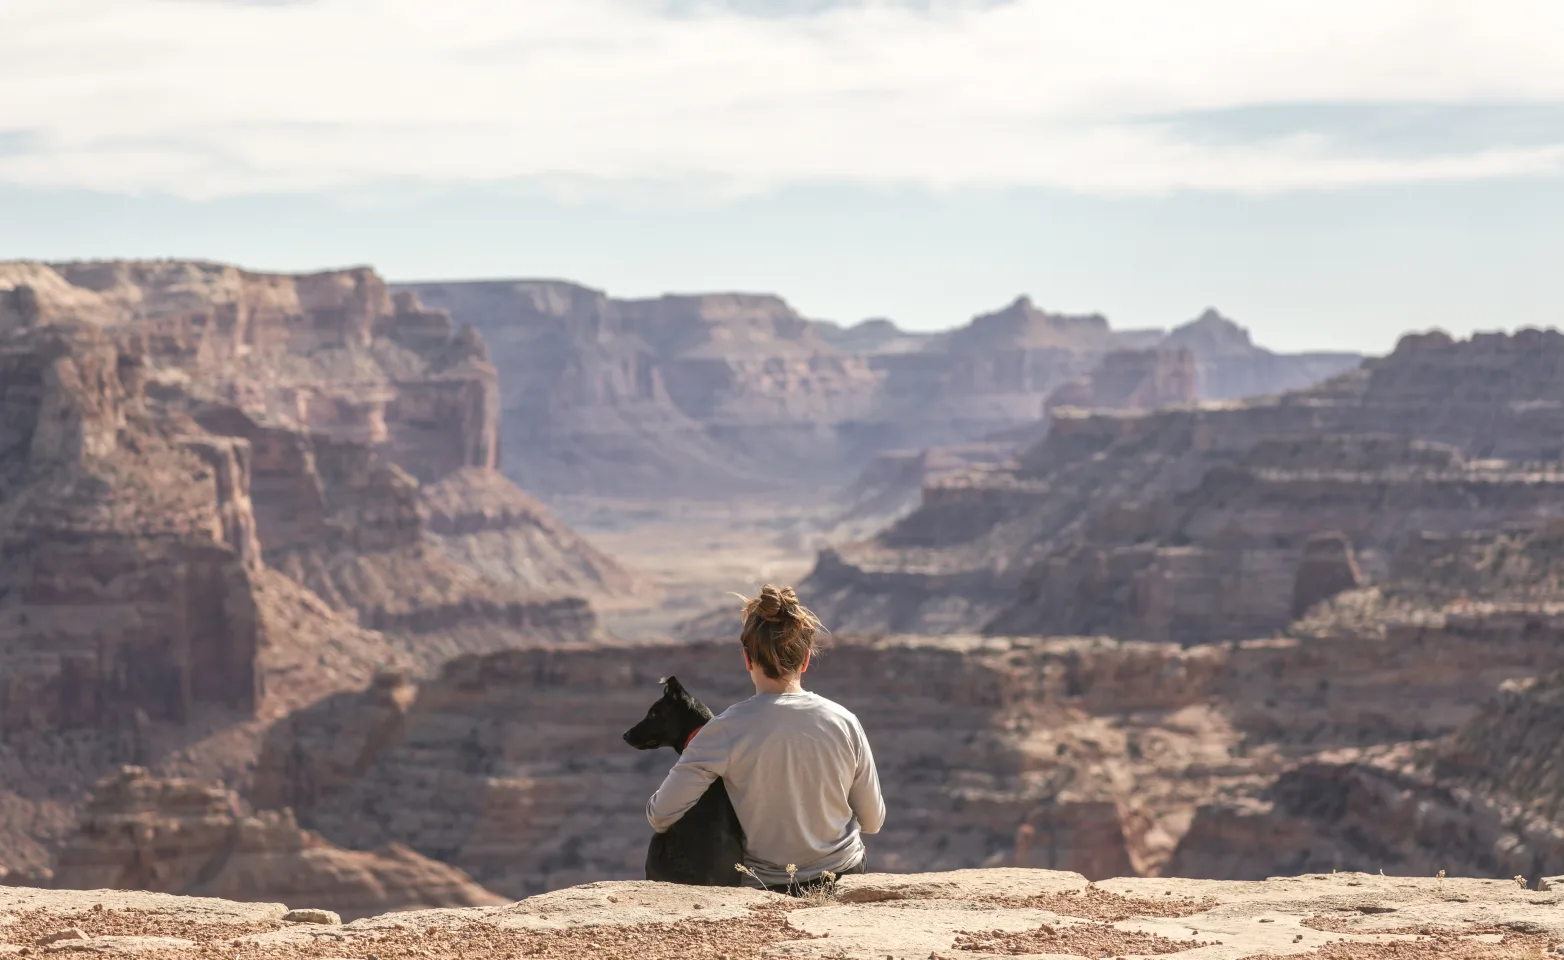 Dog and person sitting on the edge of a cliff starring at the canyon.